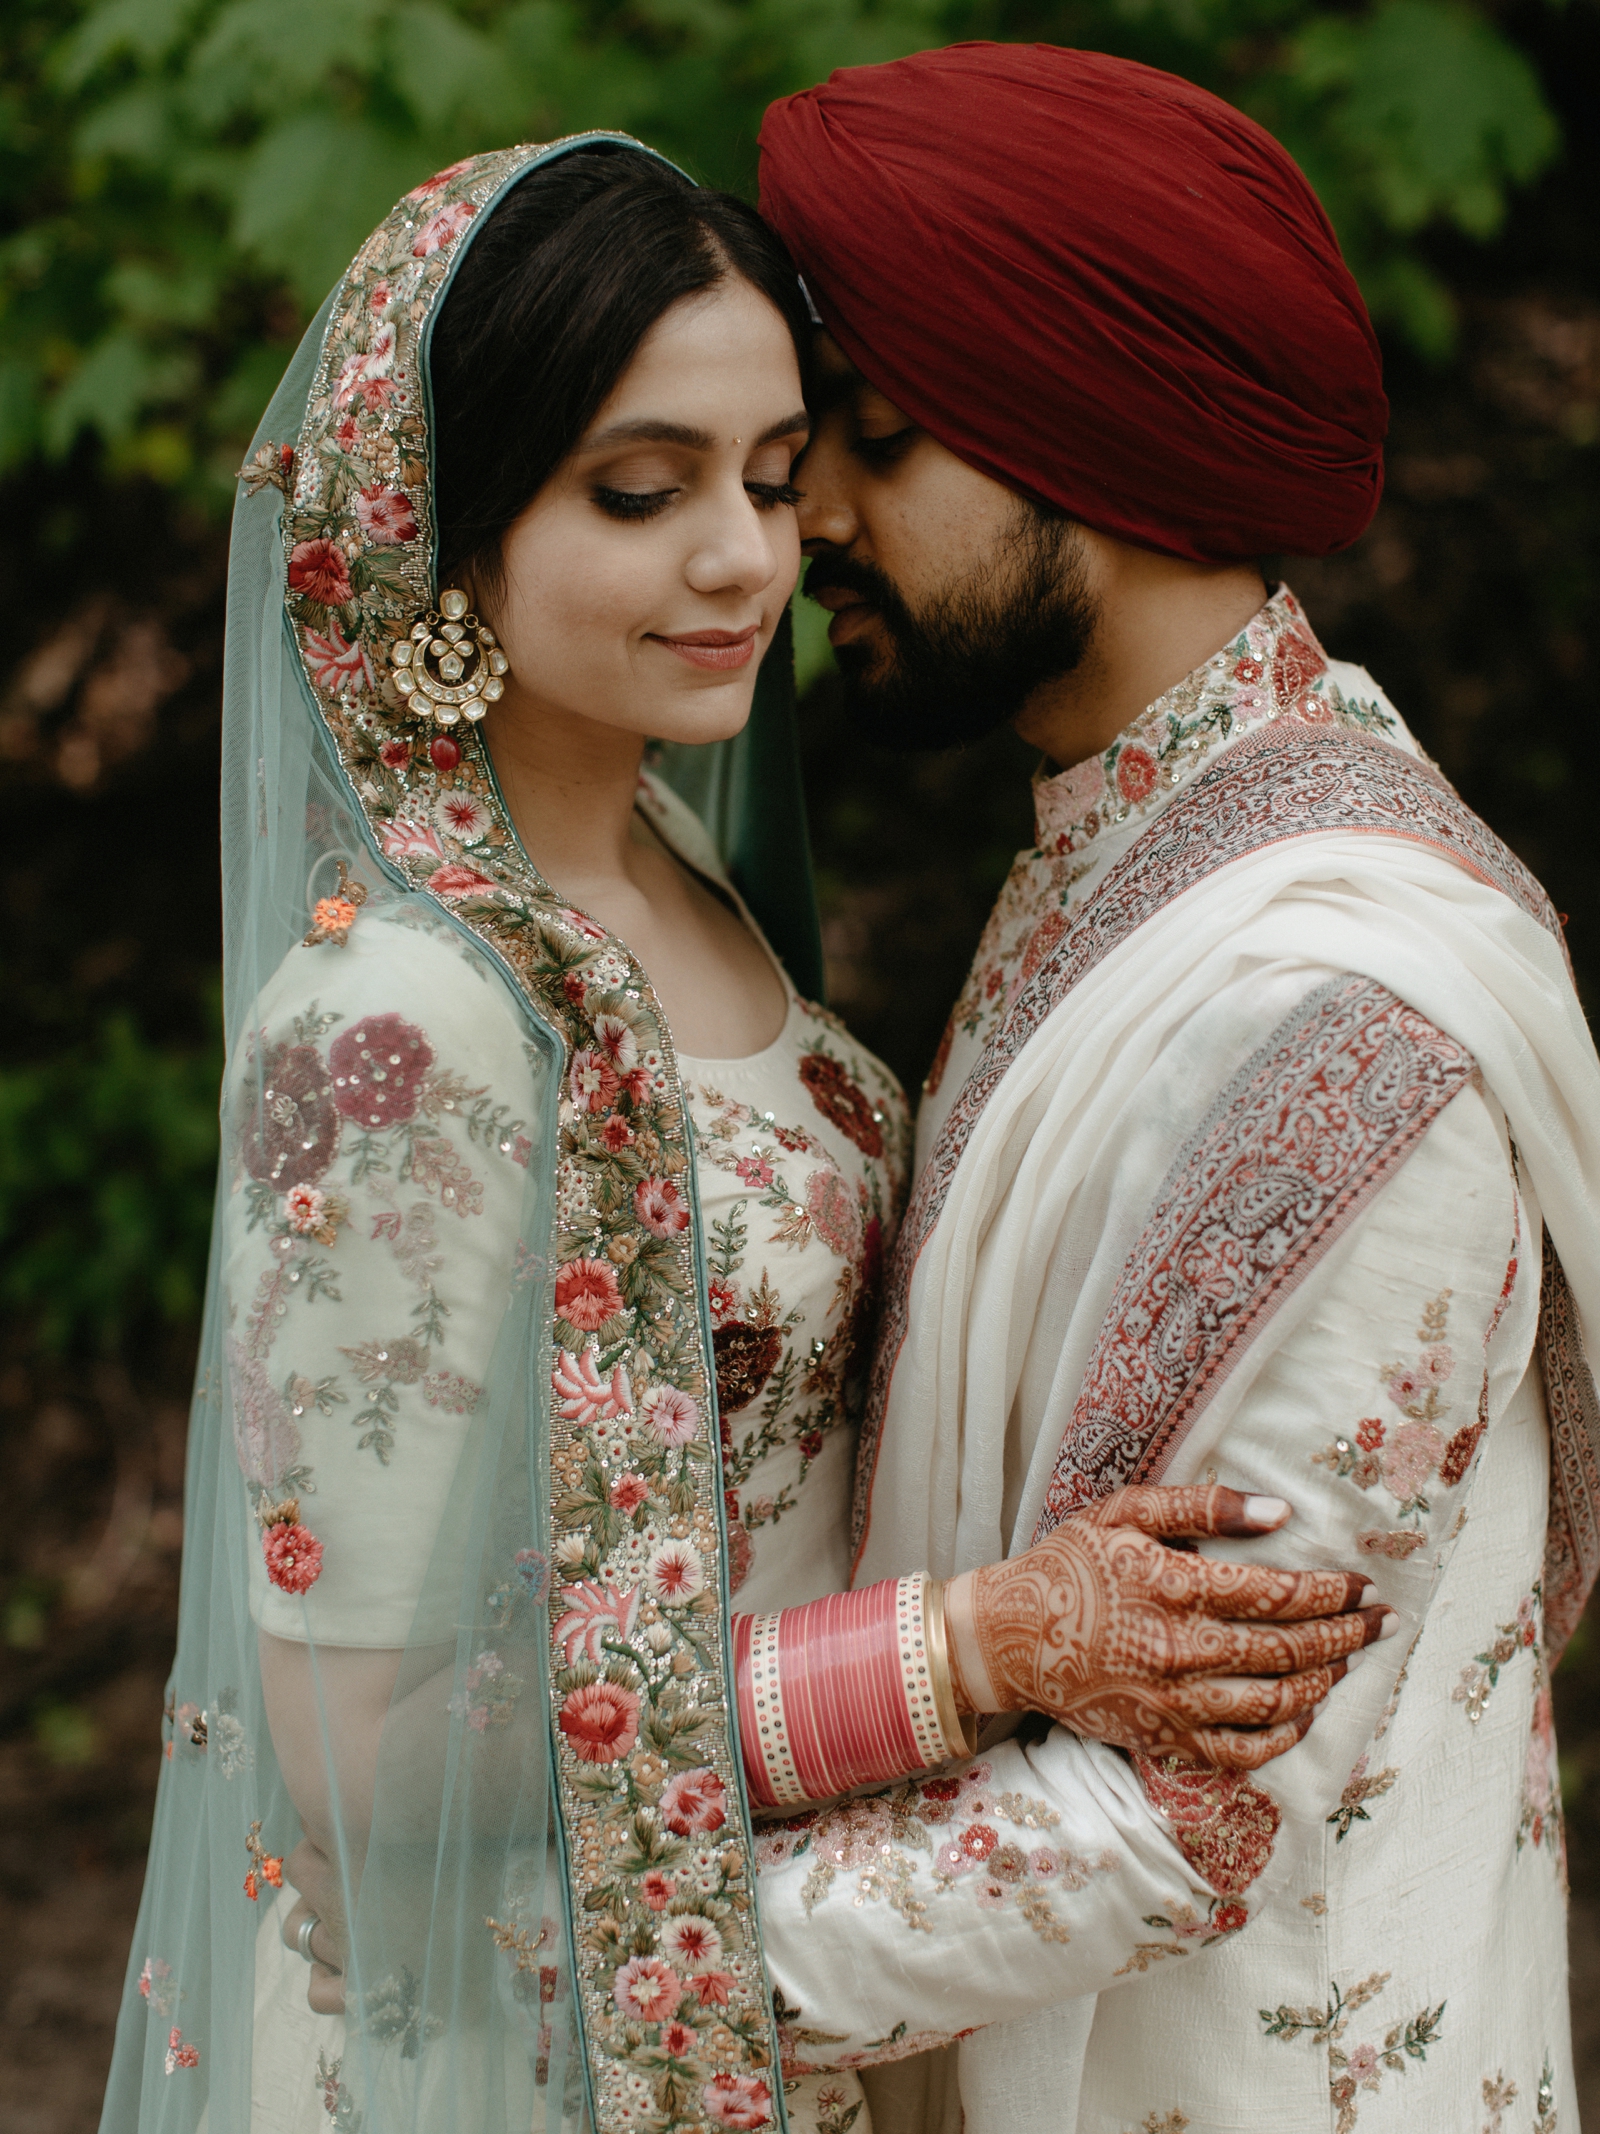 Timeless portrait of a bride and groom in lehenga with cream, teal and soft pink hues